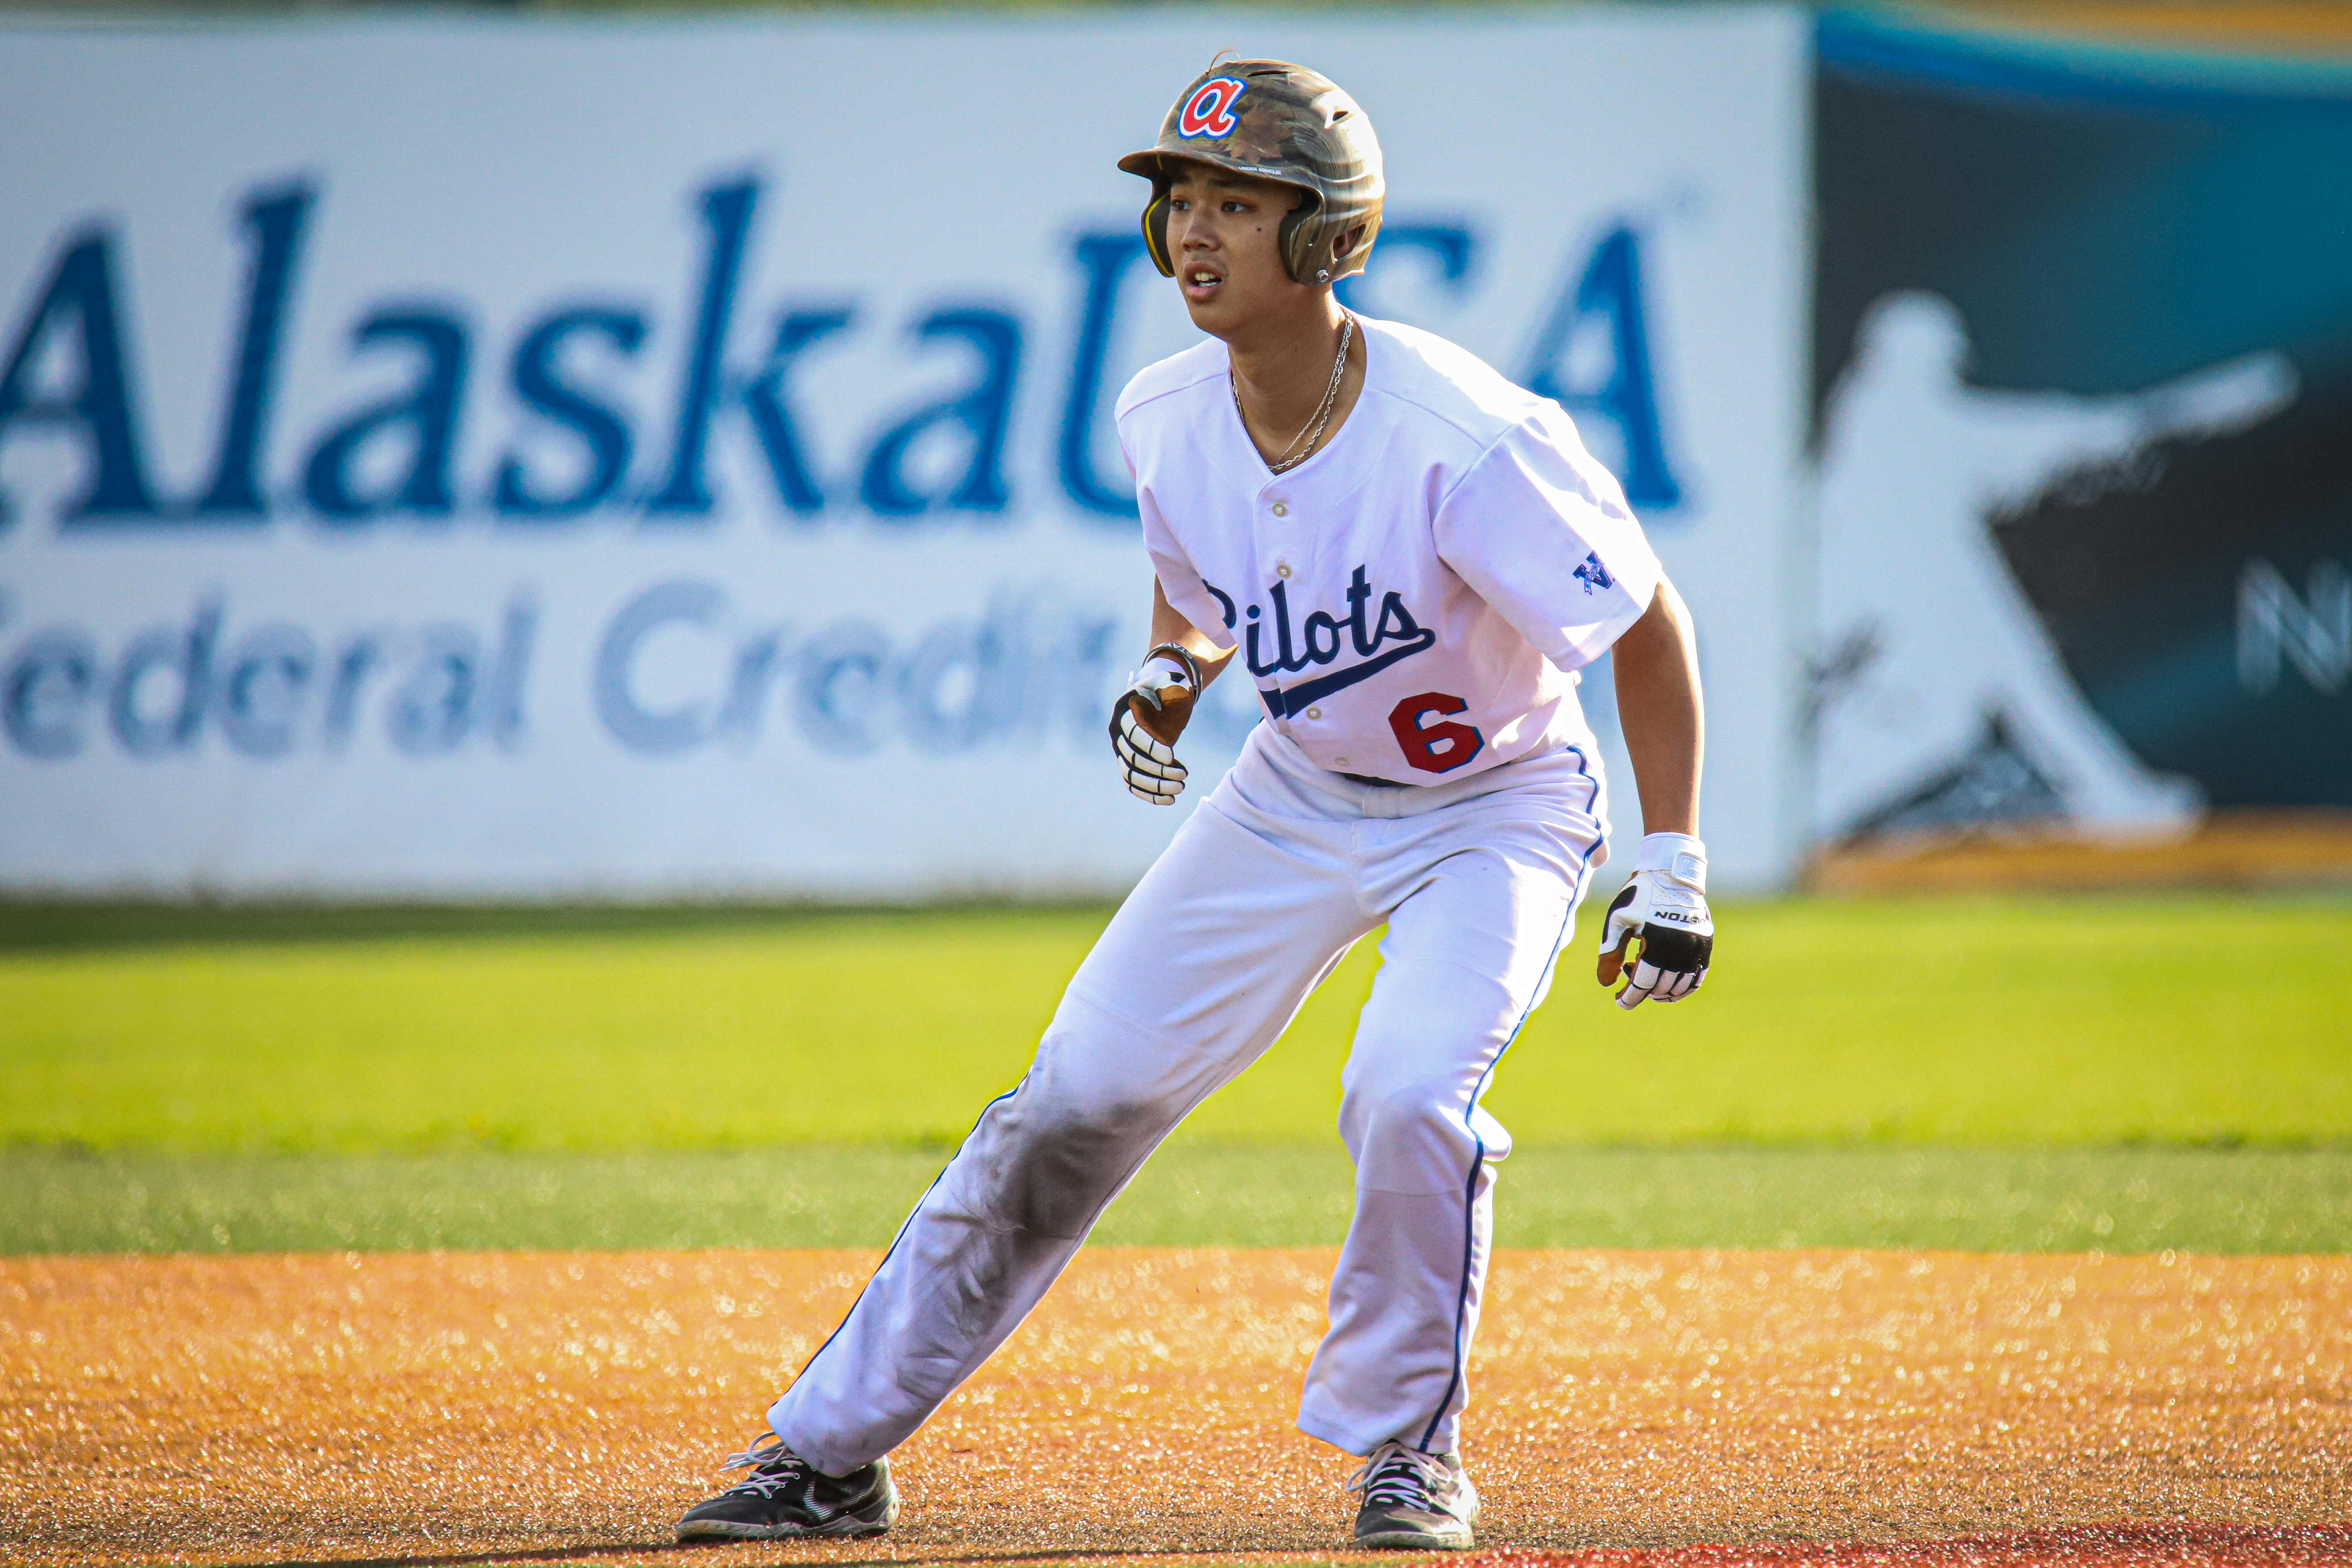 Outfielder Kan Taguchi helps Anchorage Glacier Pilots start strong